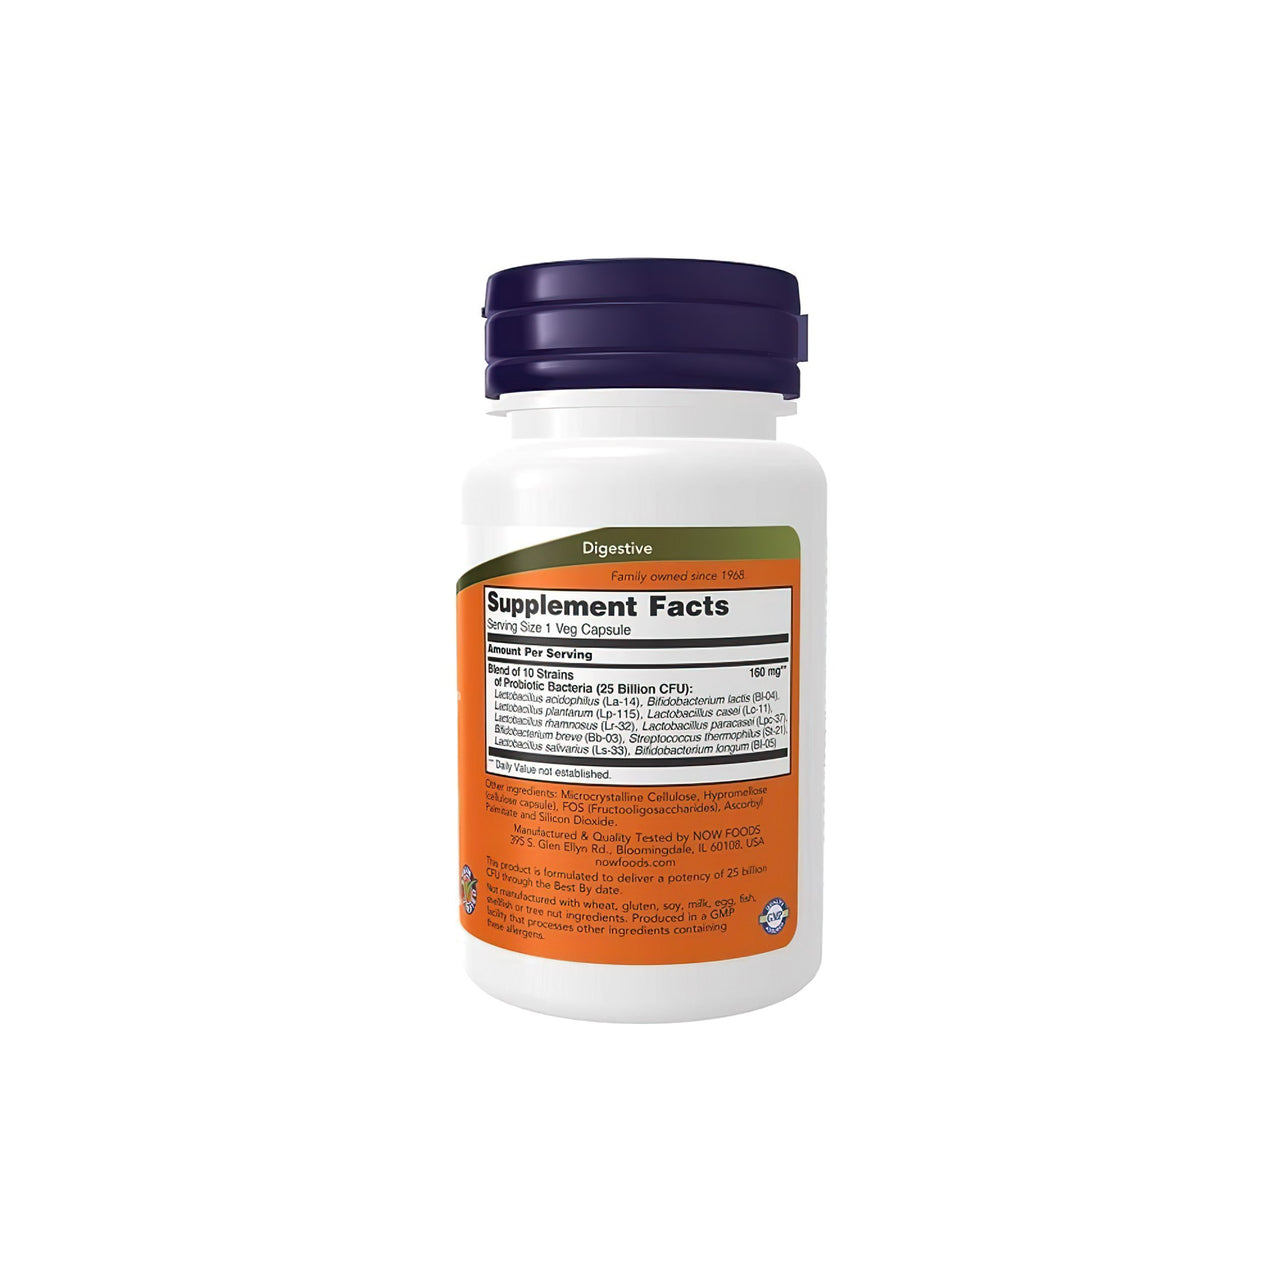 A bottle of Probiotic-10 25 Billion 50 vege capsules, known for boosting immunity and aiding digestion, on a white background. (Brand: Now Foods)